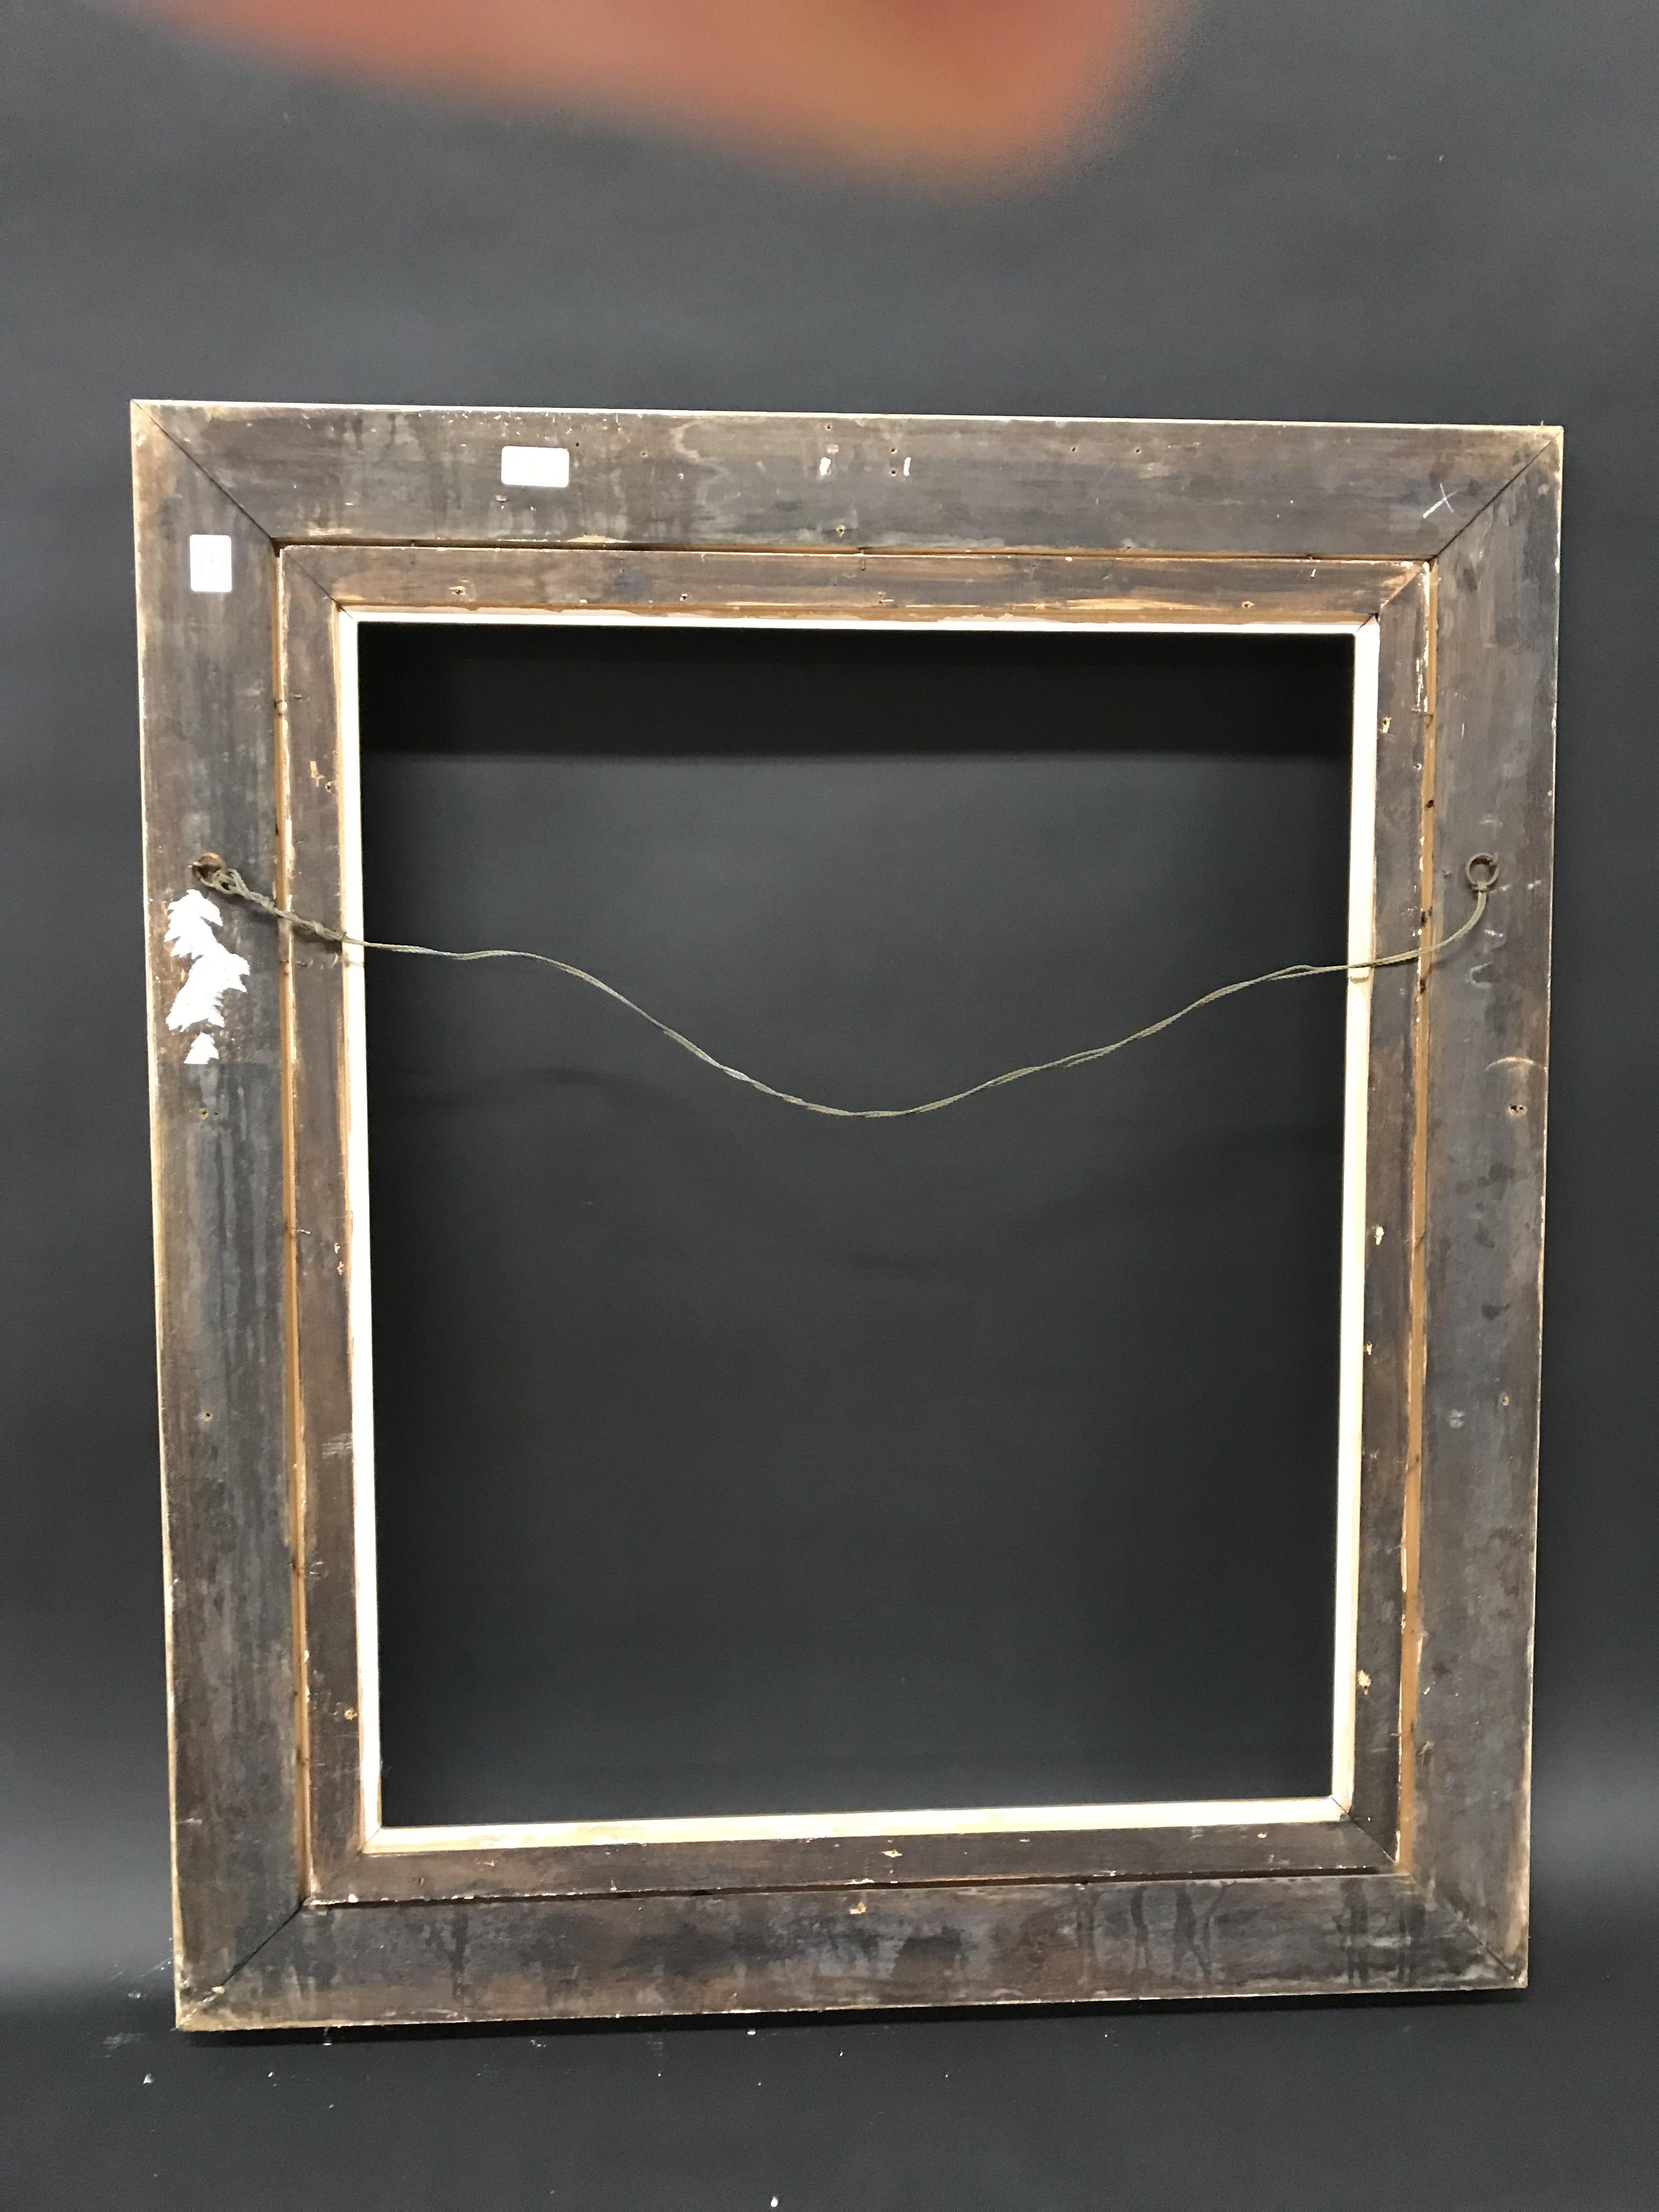 20th Century English School. A Painted Composition Frame, with Swept Centres and Corners, 29" x 23. - Image 3 of 3